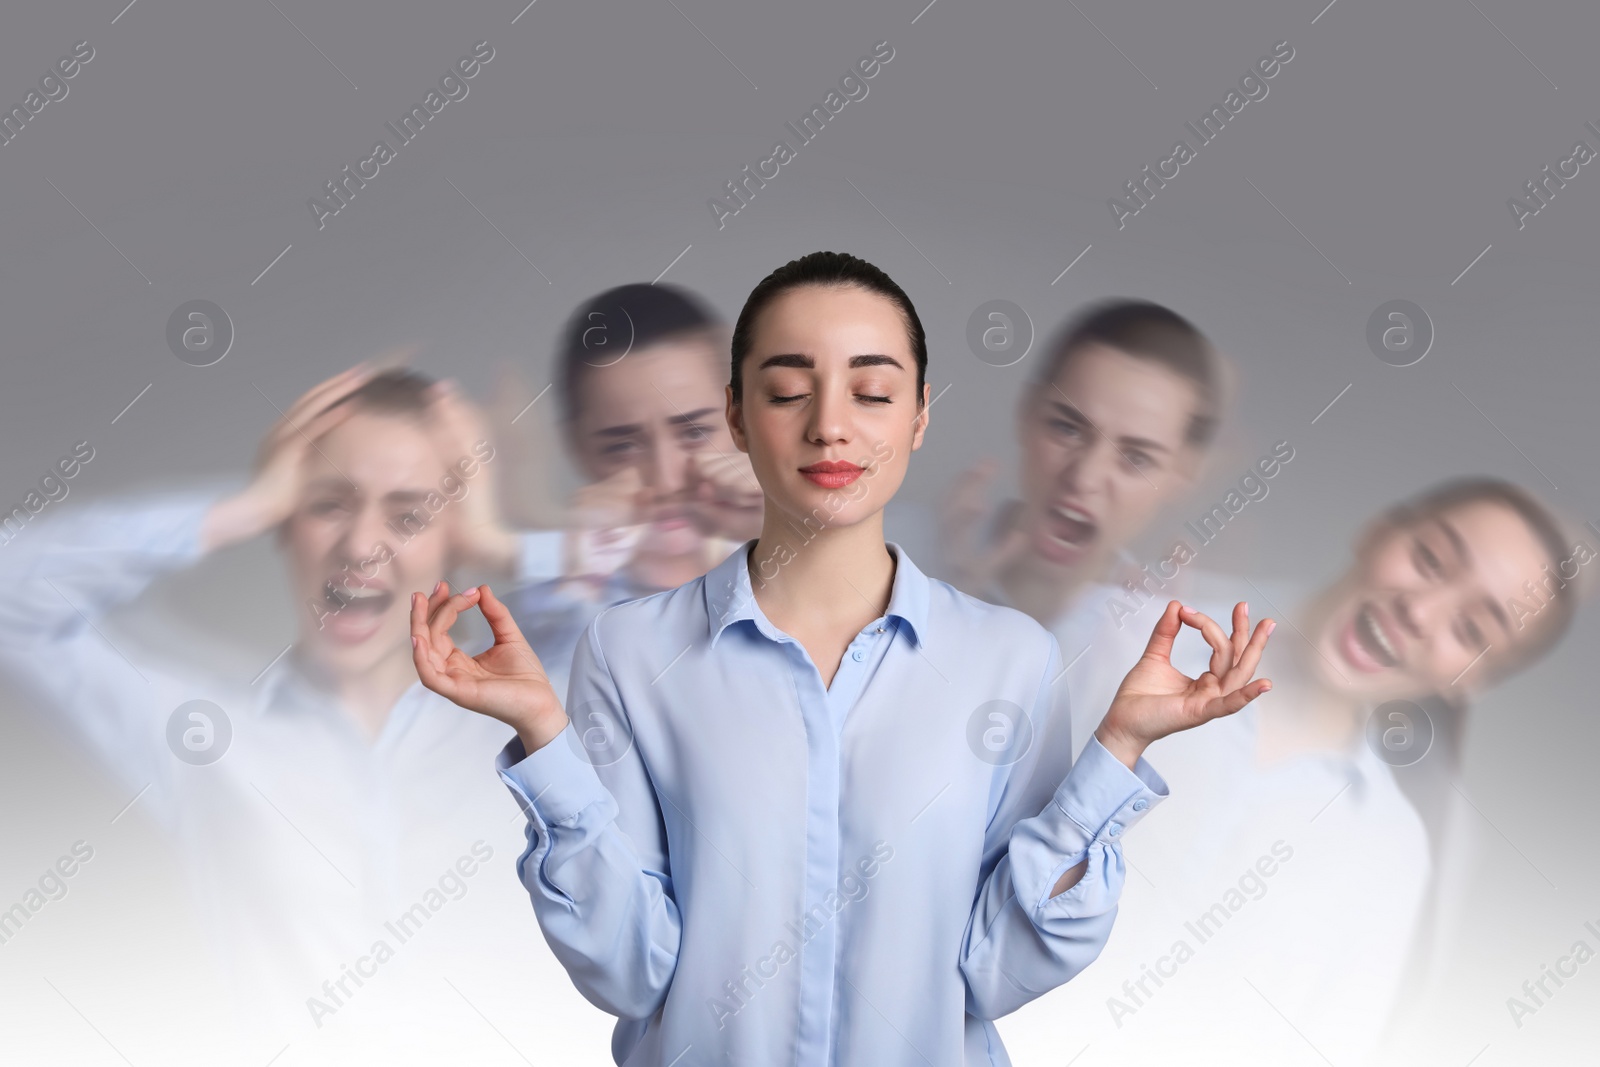 Image of Woman with personality disorder on light background, multiple exposure 